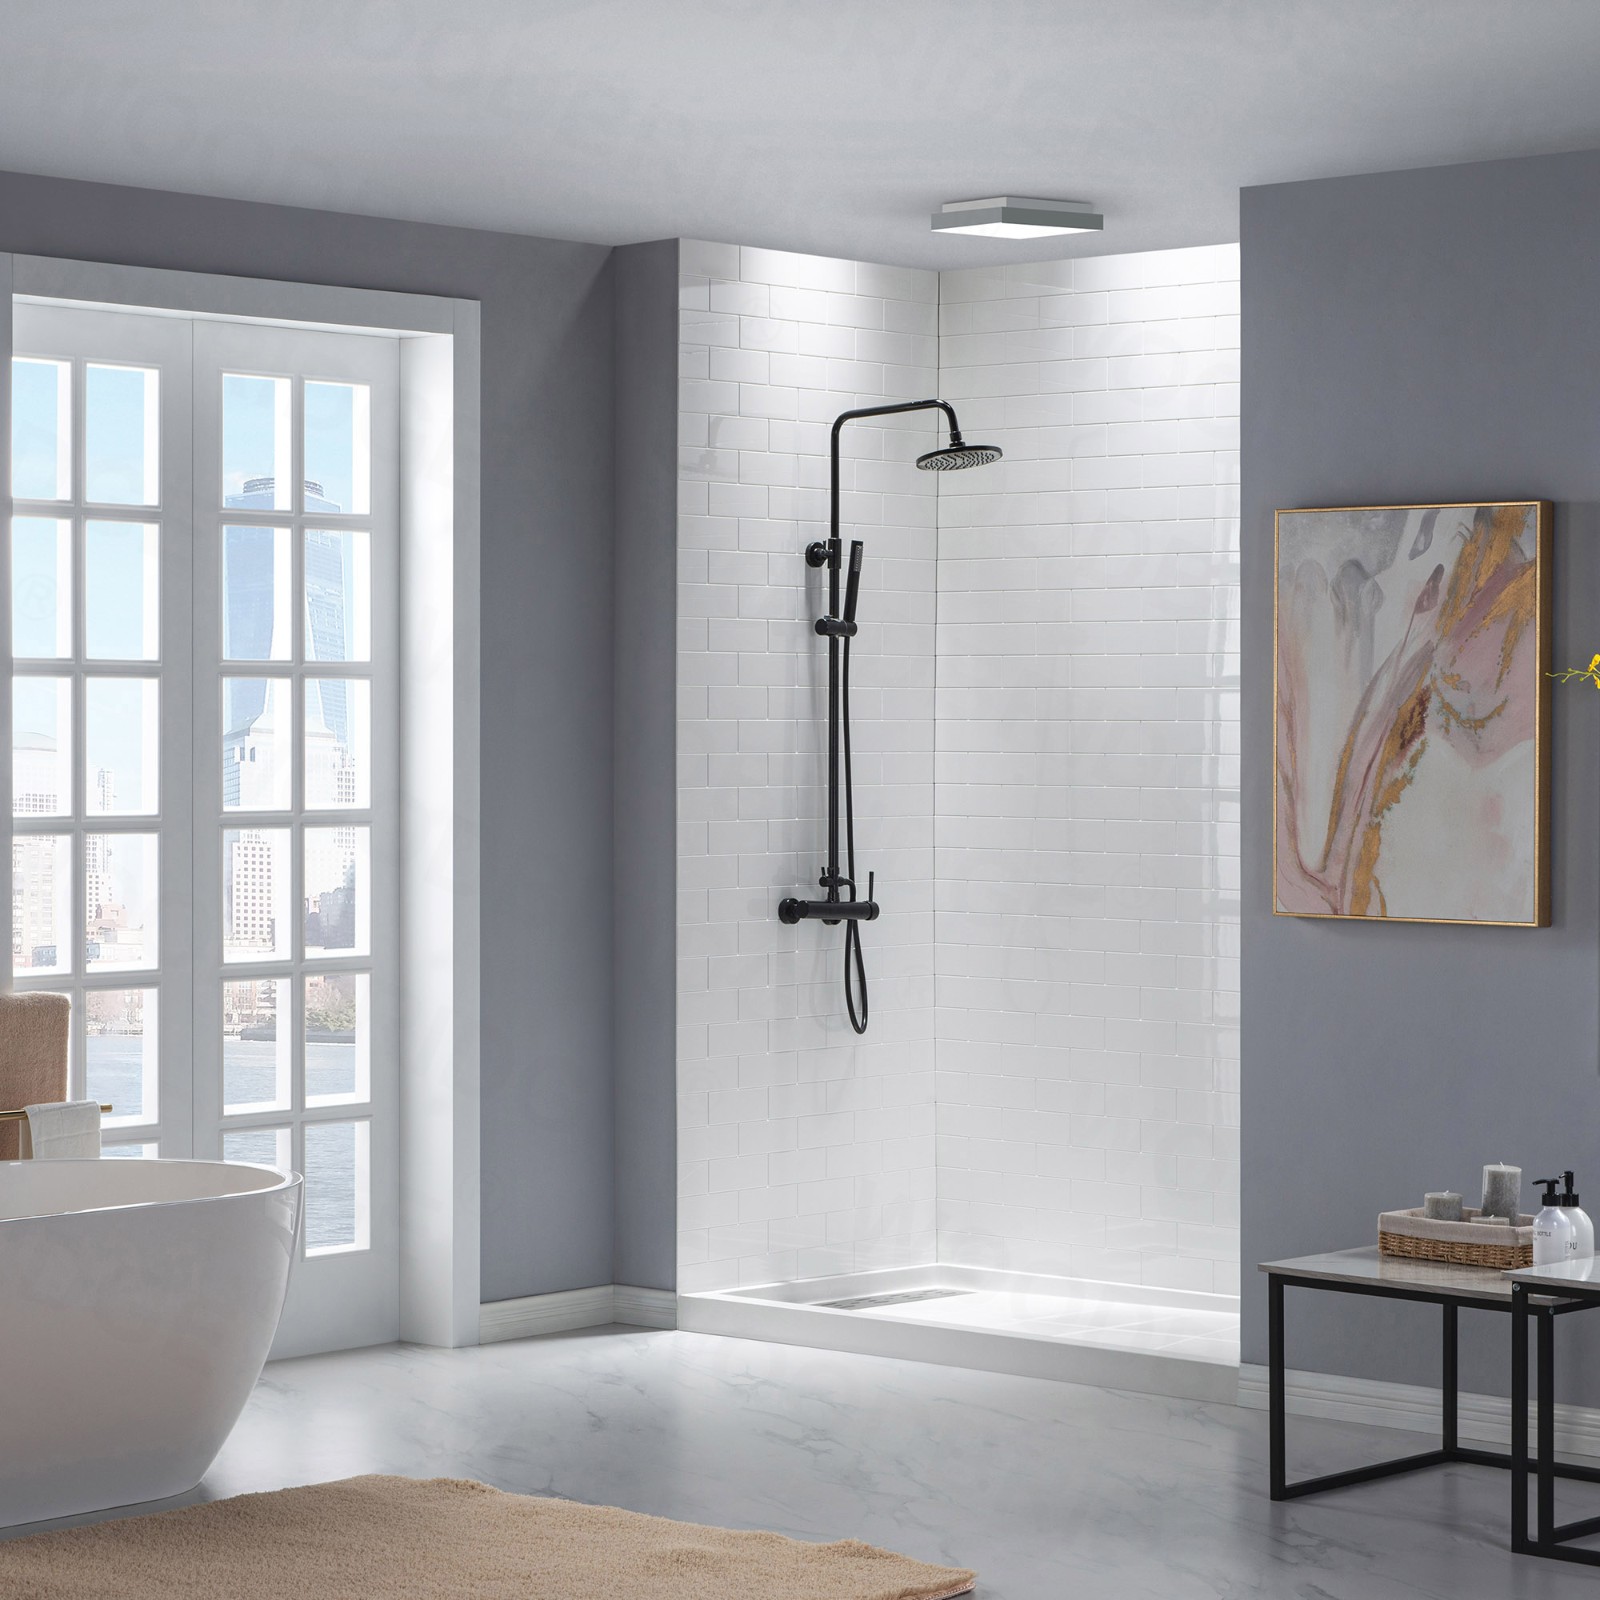  WOODBRIDGE SBR6034-1000L-ORB SolidSurface Shower Base with Recessed Trench Side Including Oil Rubbed Bronze Linear Cover, 60